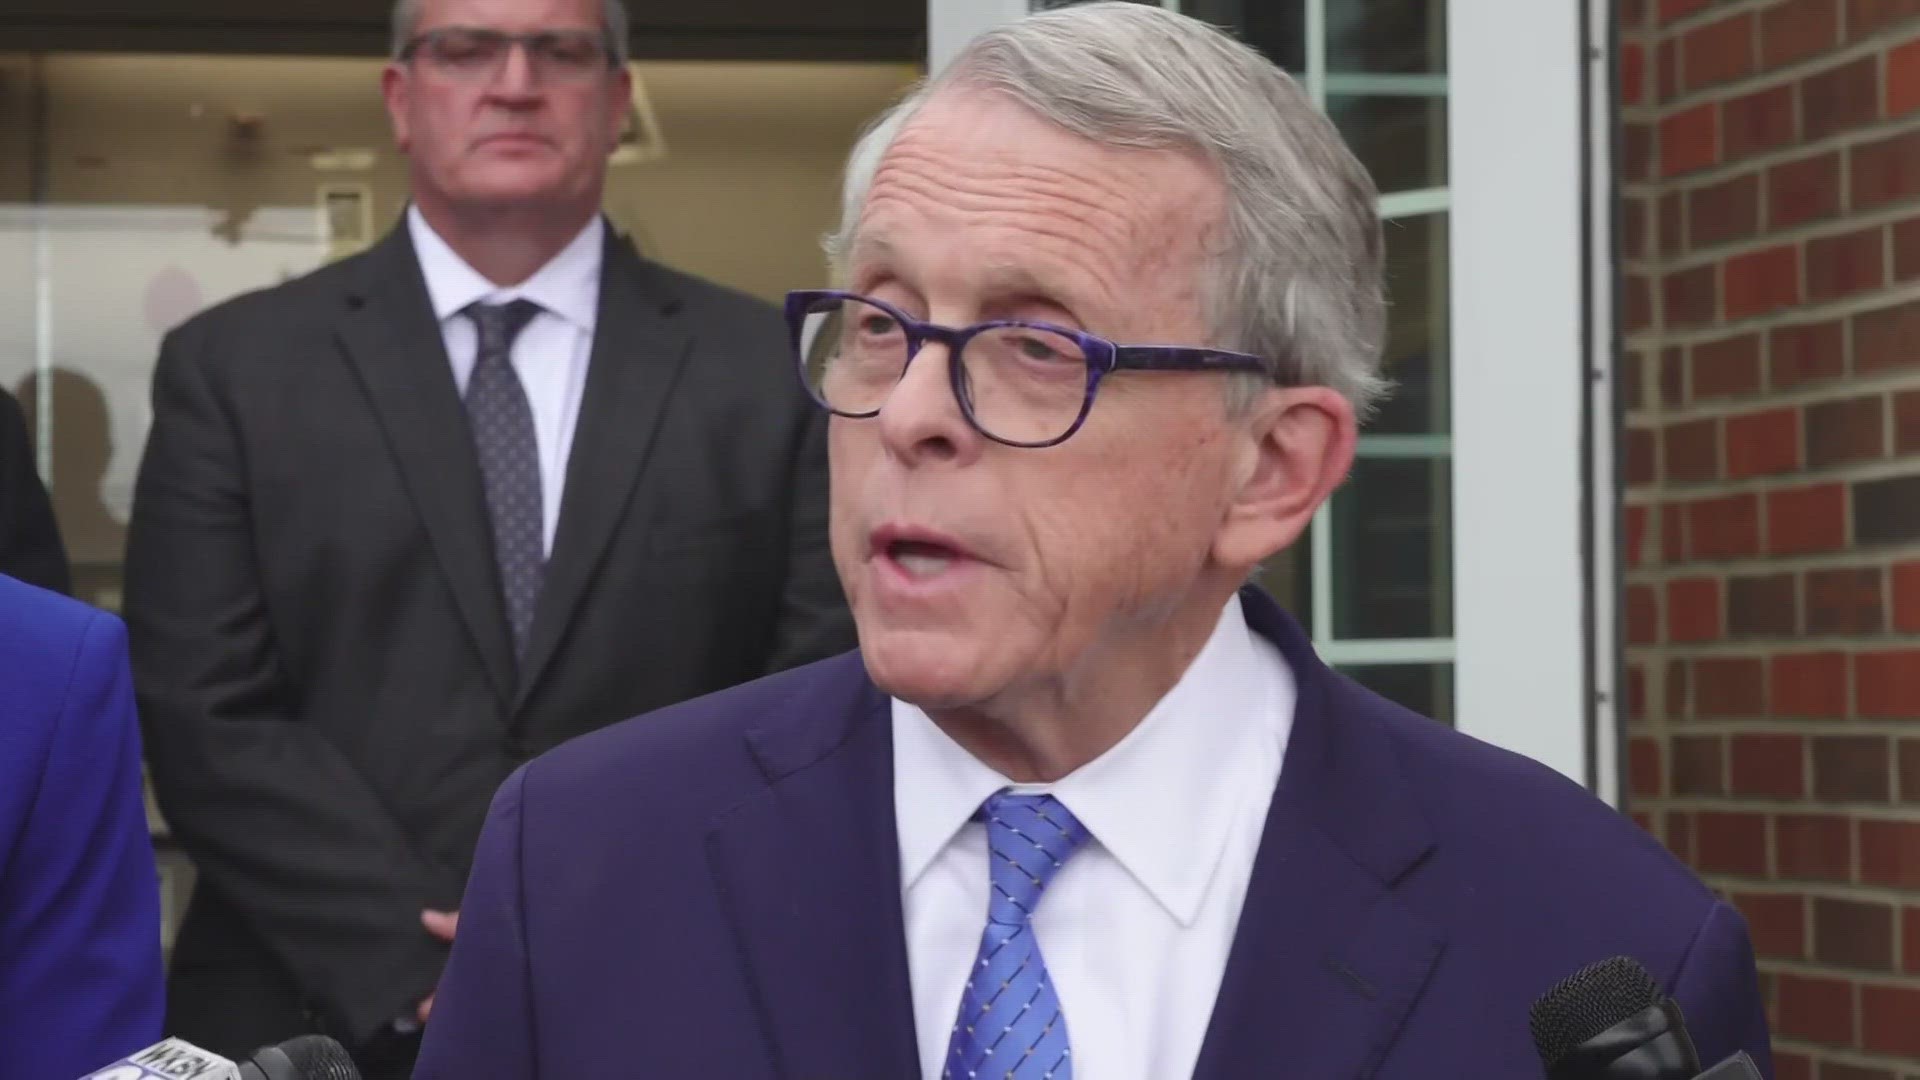 DeWine says the funds will help pay for the cost of a pair of dump trucks, a utility bed truck, and a drone for East Palestine.